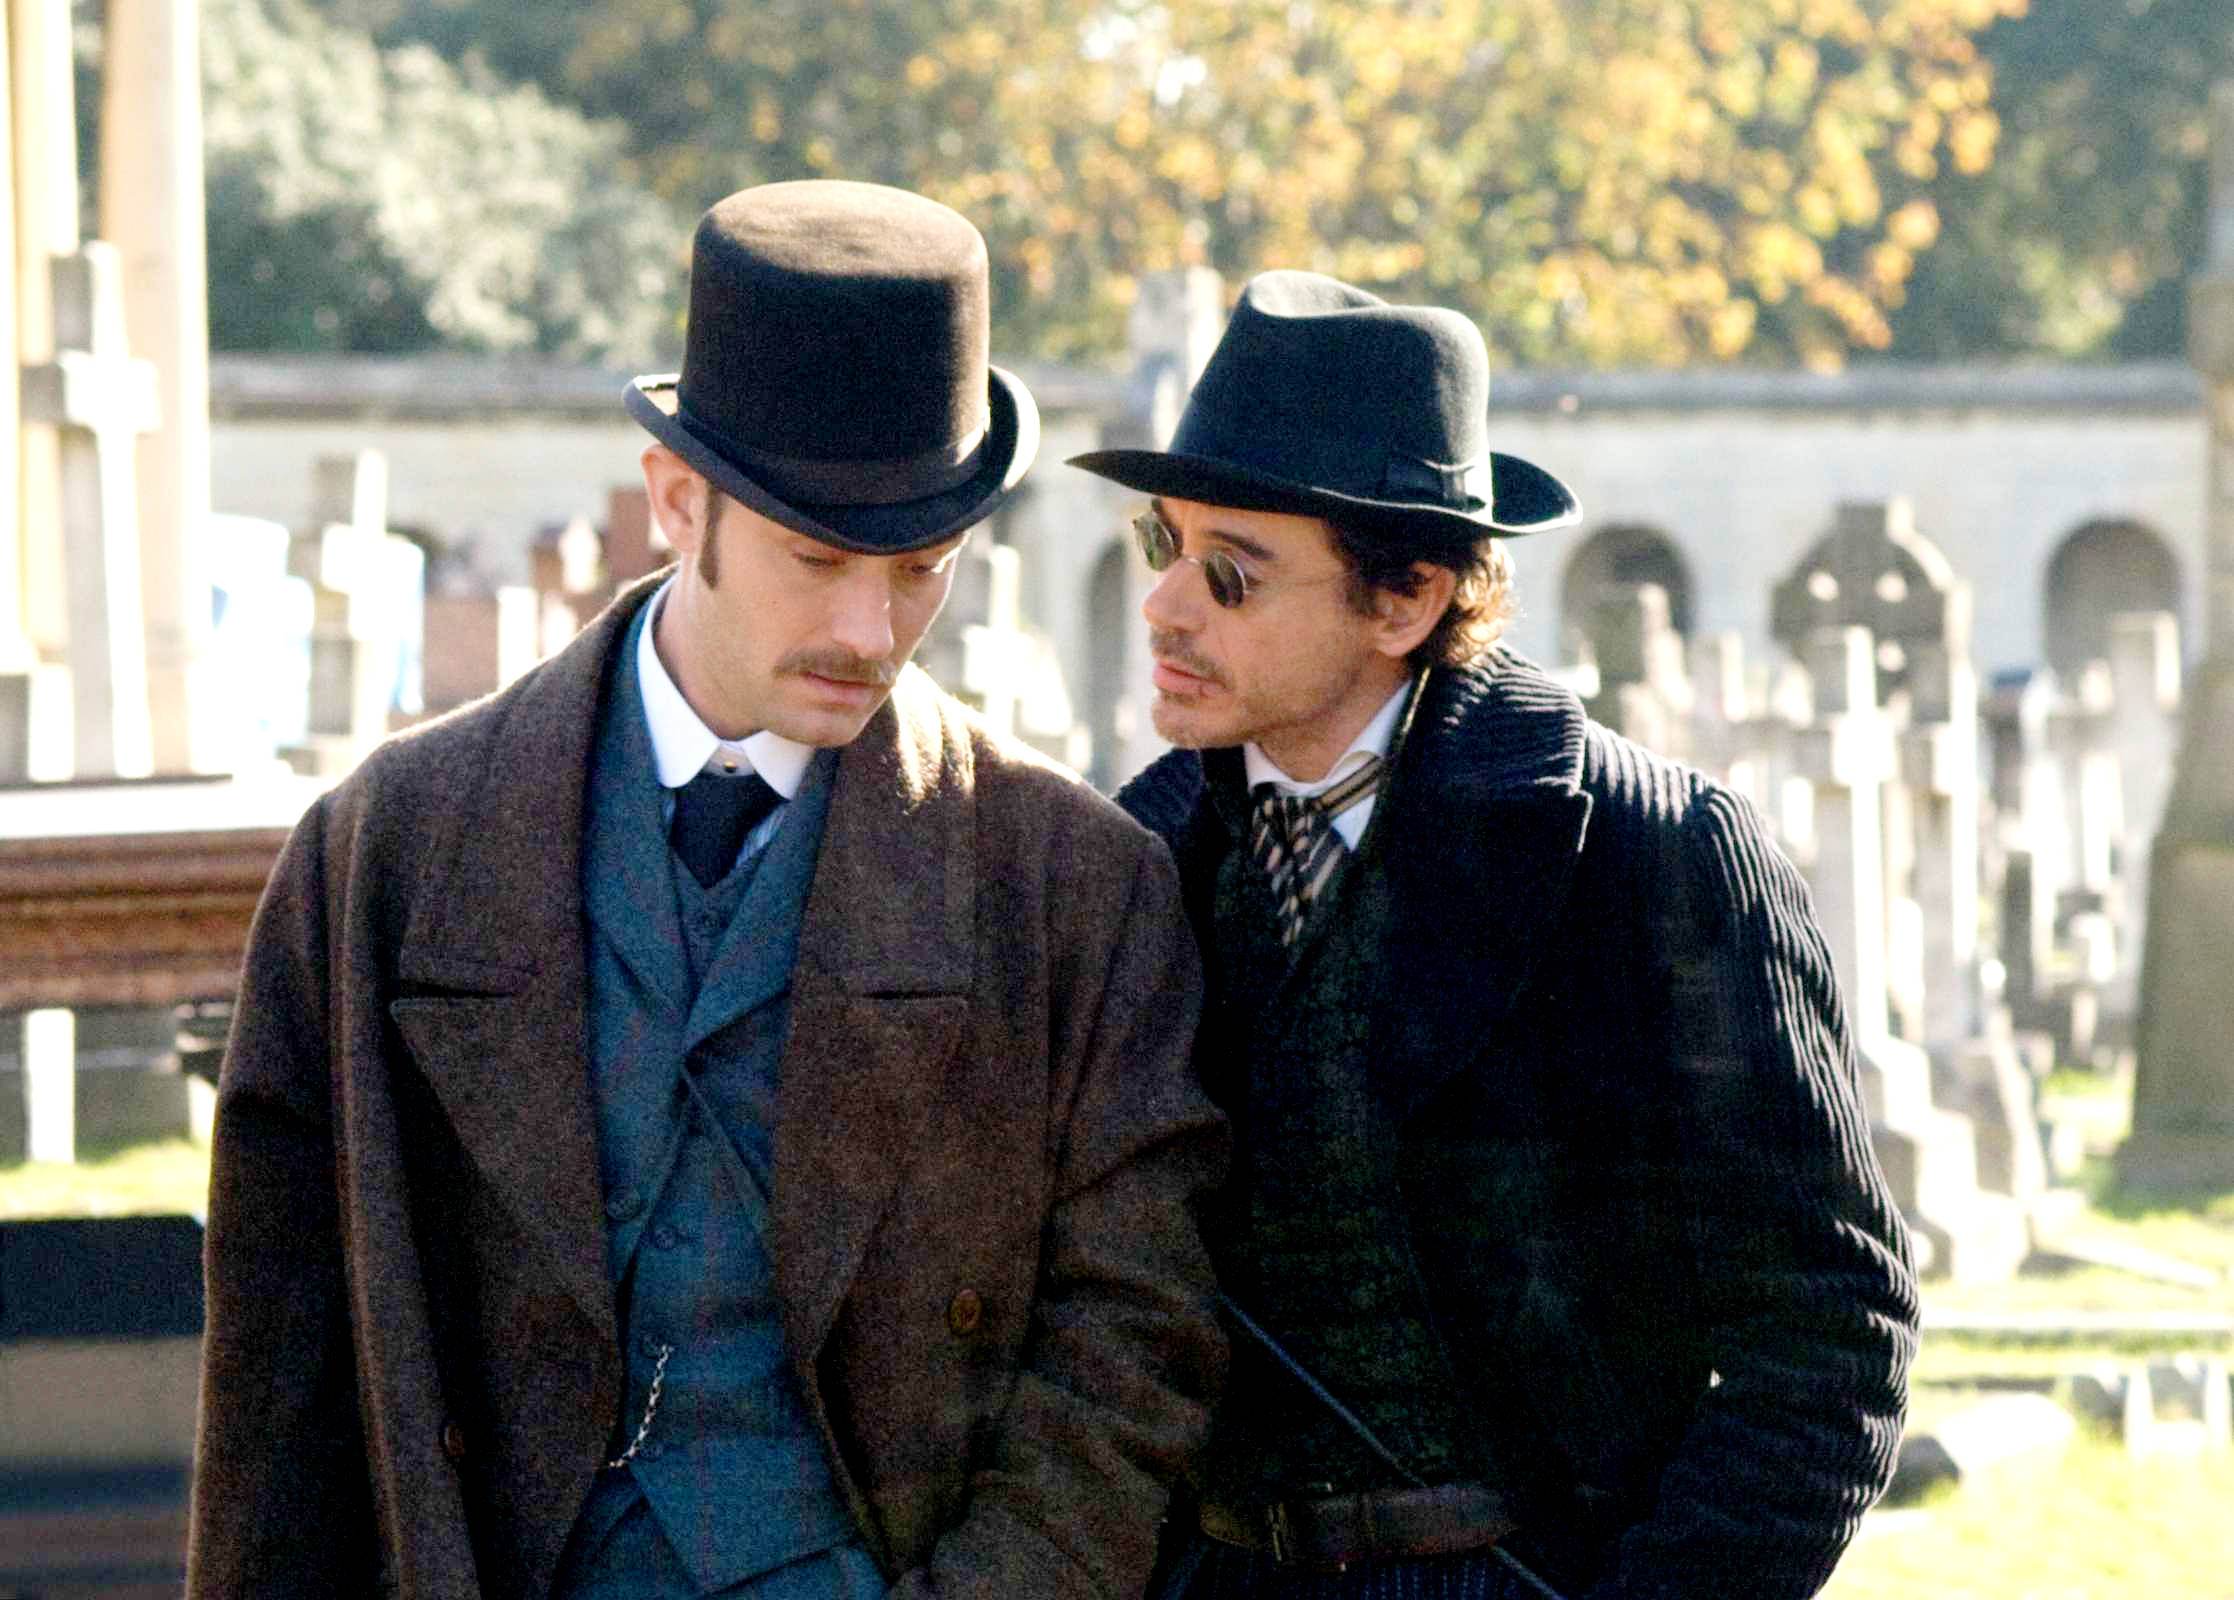 Jude Law stars as Dr. John Watson and Robert Downey Jr. stars as Sherlock Holmes in Warner Bros. Pictures' Sherlock Holmes (2009). Photo credit by Alex Bailey.